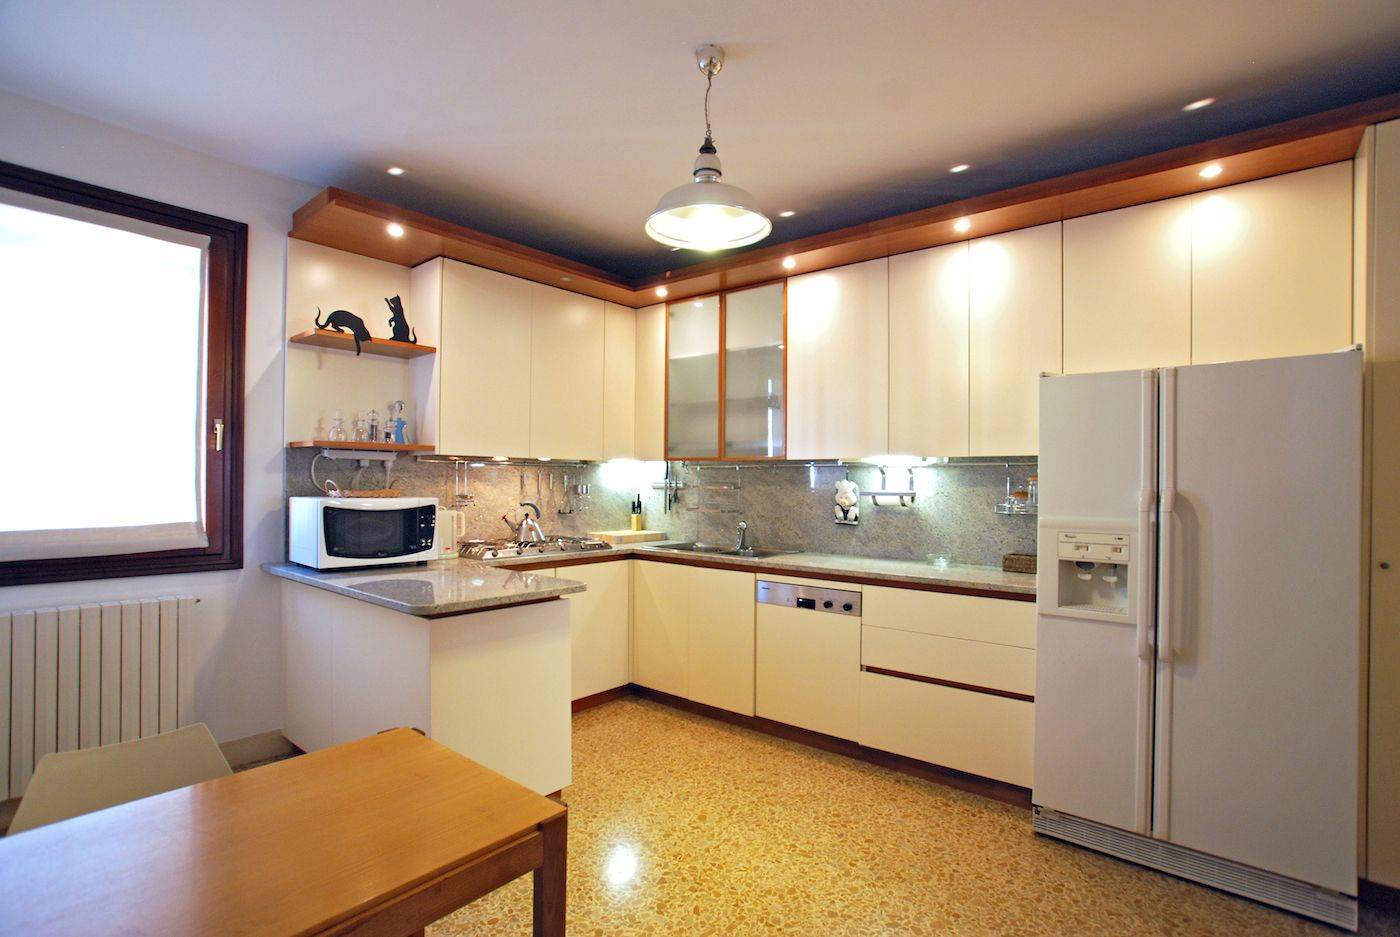 spacious kitchen with every possible amenity